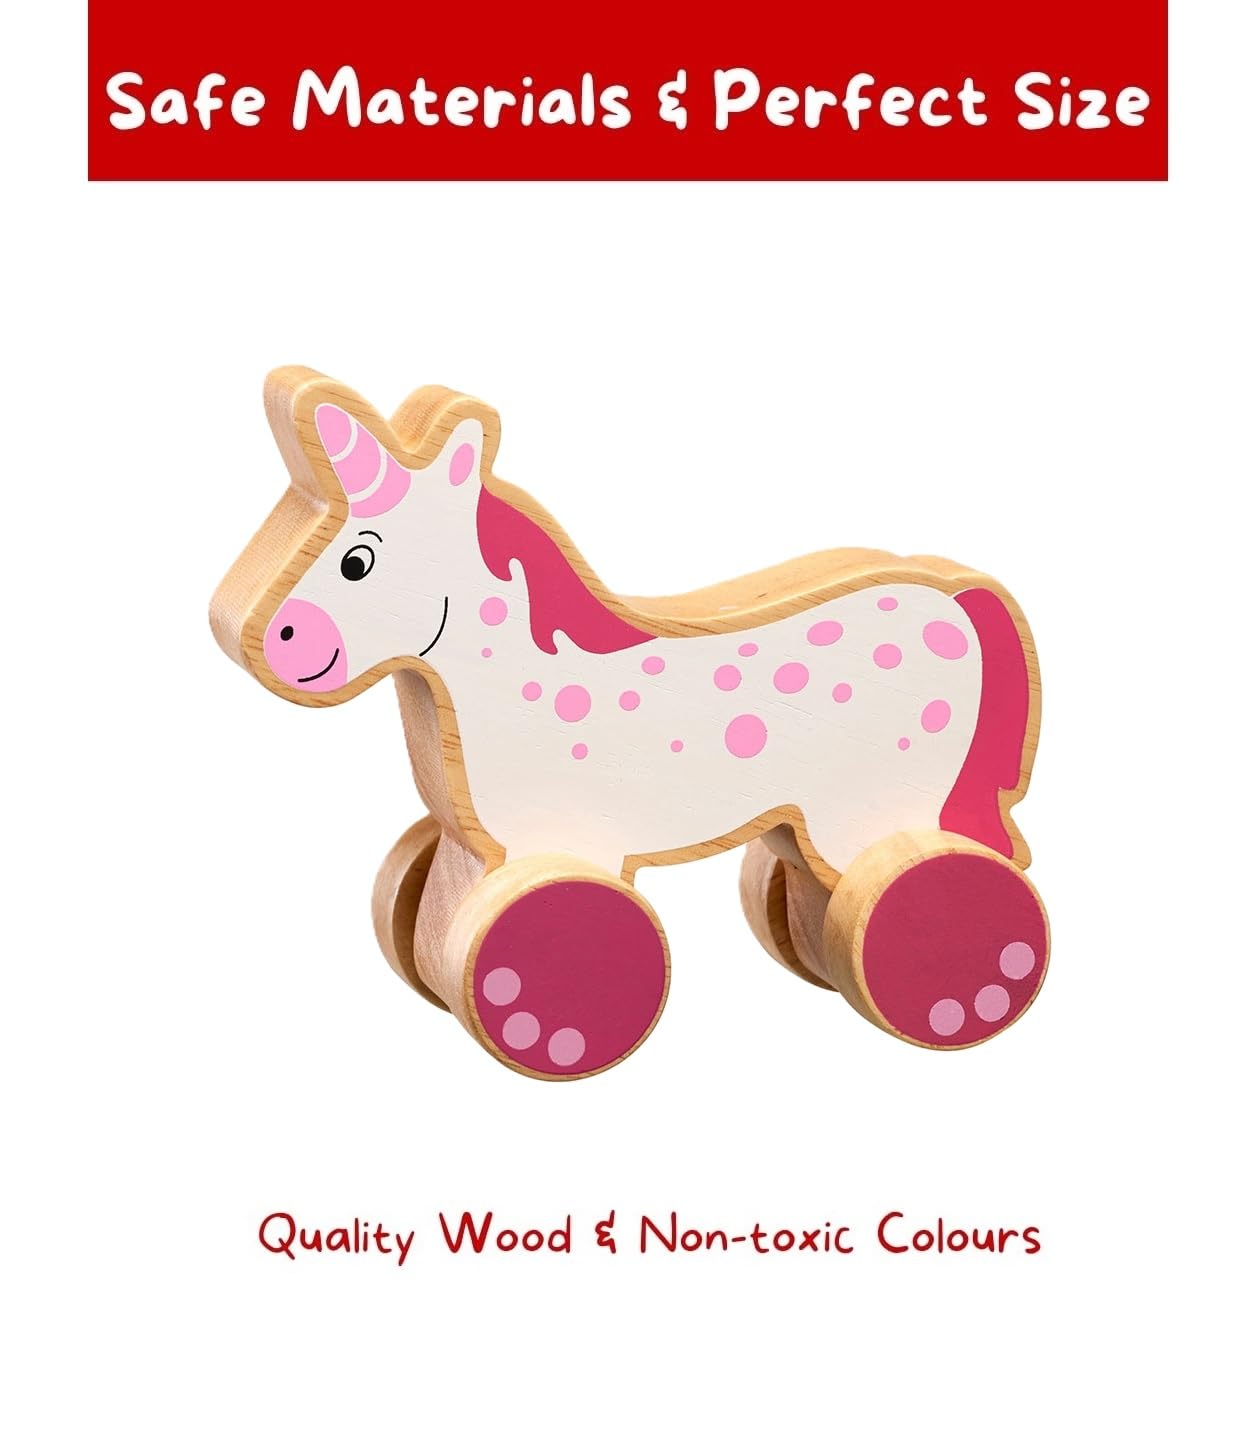 Premium Pull Along Toy Wooden Unicorn for 12 Months & Above Kids, Toddlers, Infant & Preschool Toys - Multicolor - with Attached String- Encourage Walking